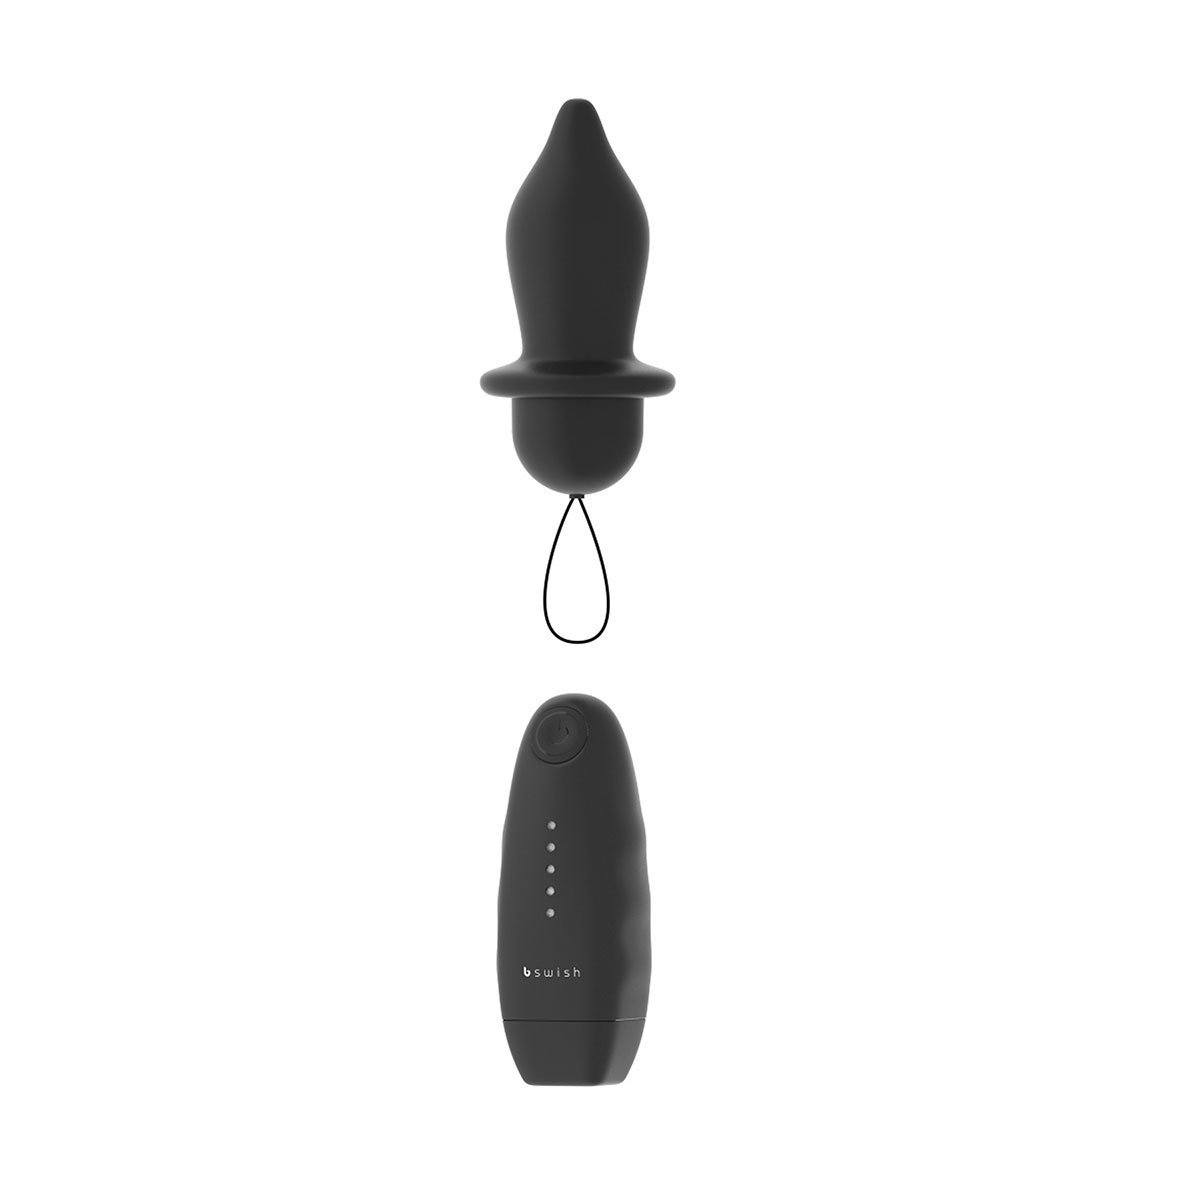 Bfilled Classic Remote Vibrating Plug free shipping - Beyond Delights